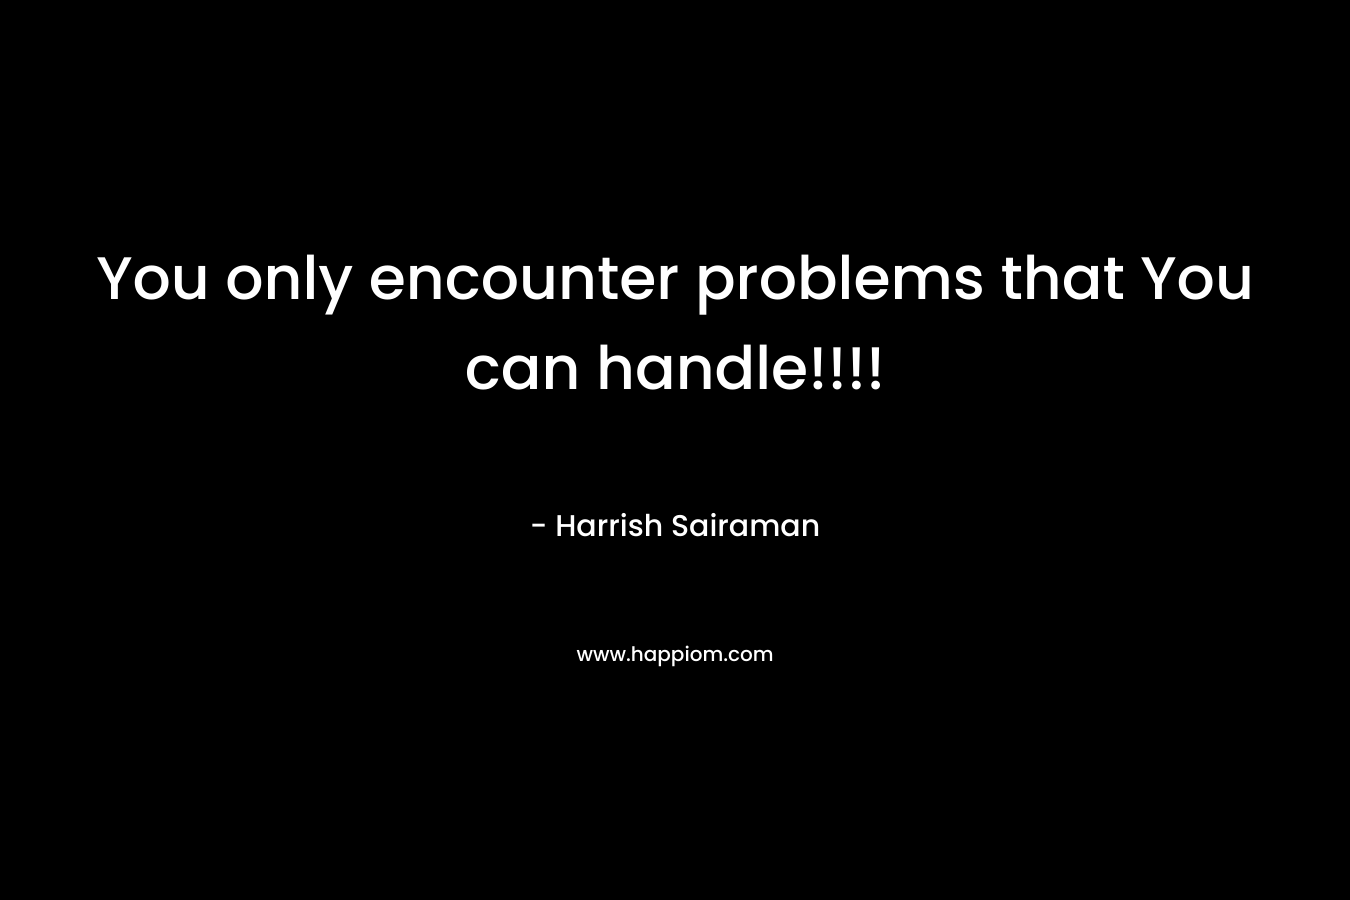 You only encounter problems that You can handle!!!!